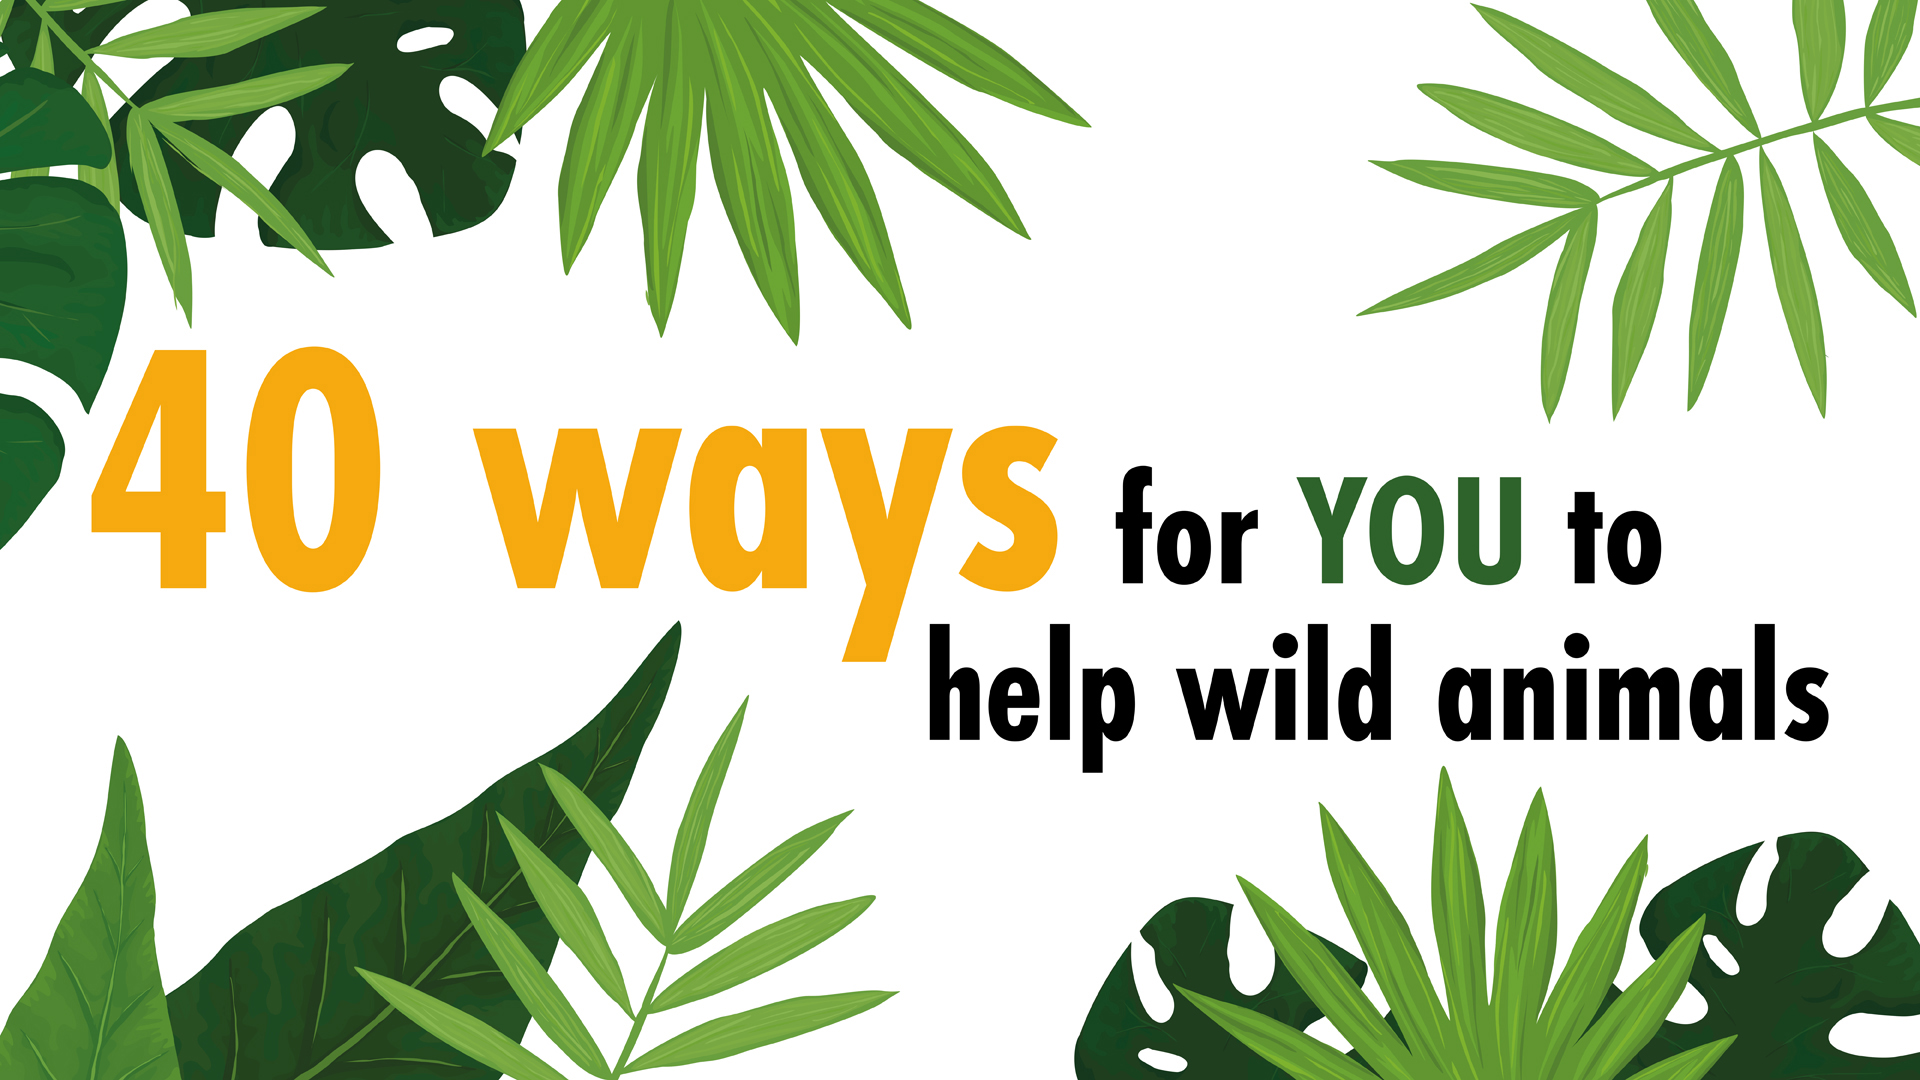 A banner with leafy border and text reading '40 ways for YOU to help wild animals'